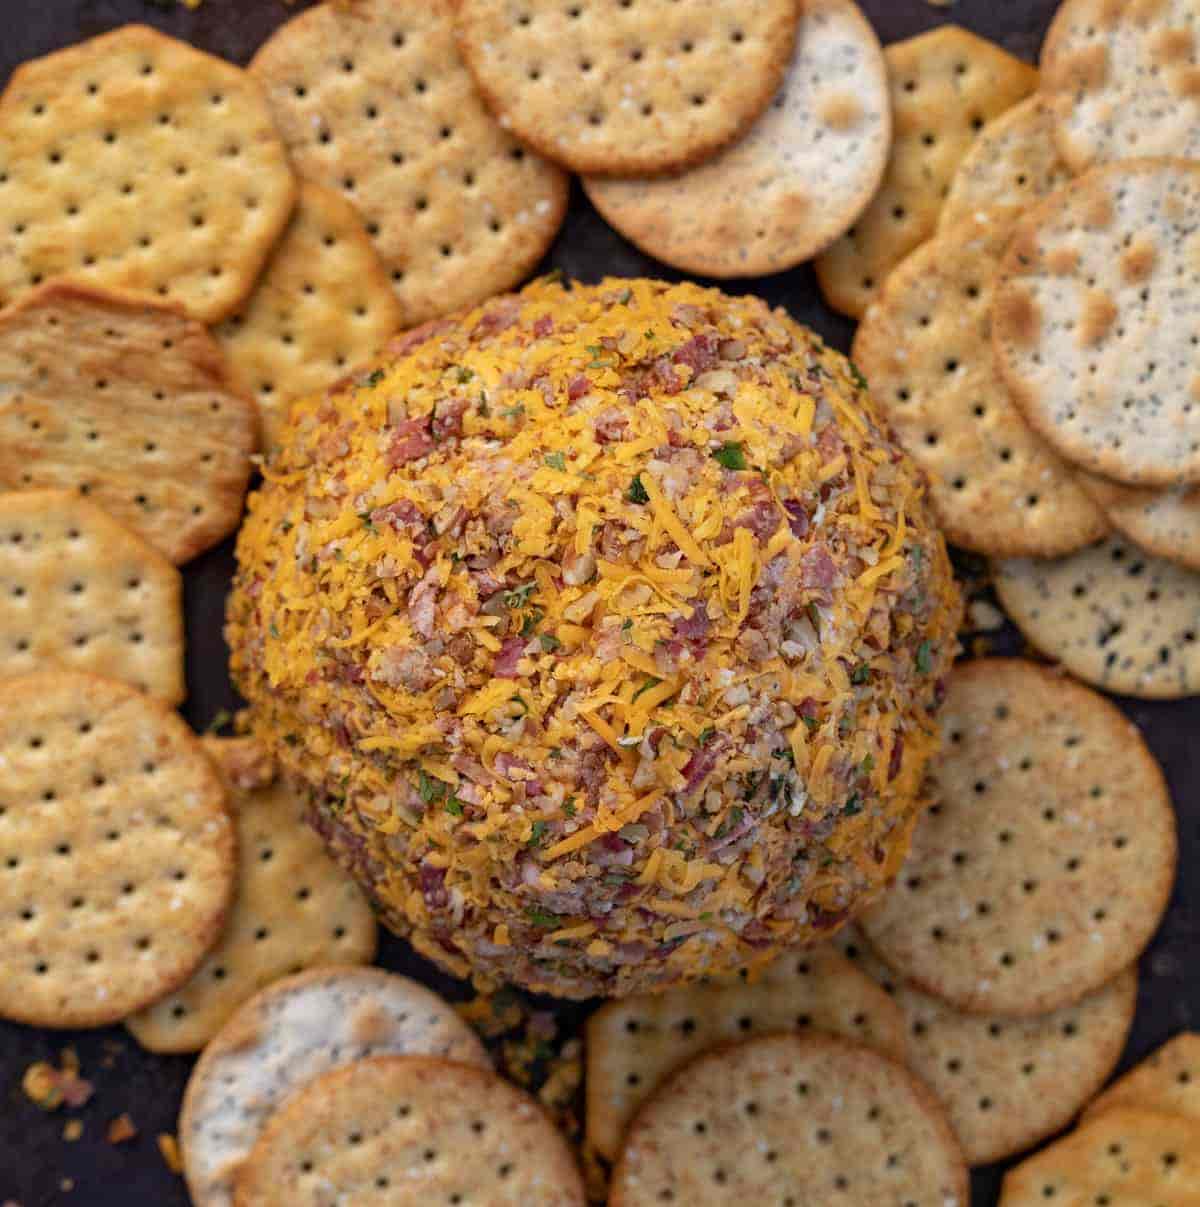 A Unique Bacon Cheese Ball Extravaganza for Your Festive Gathering